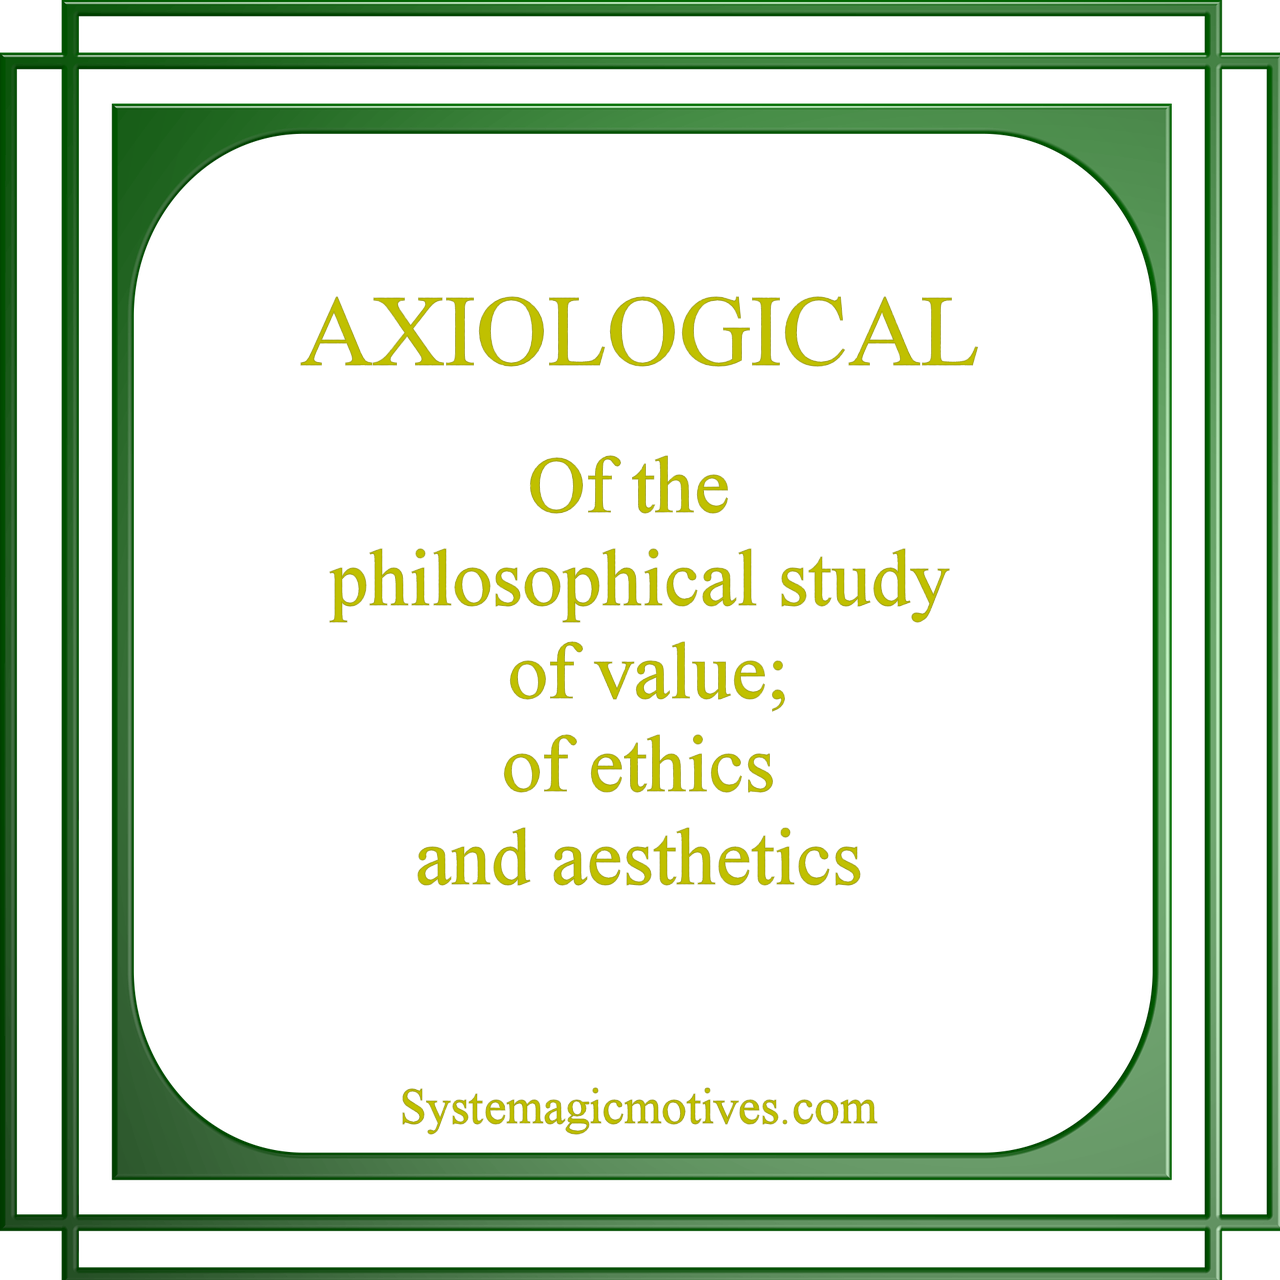 Graphic Definition of Axiological